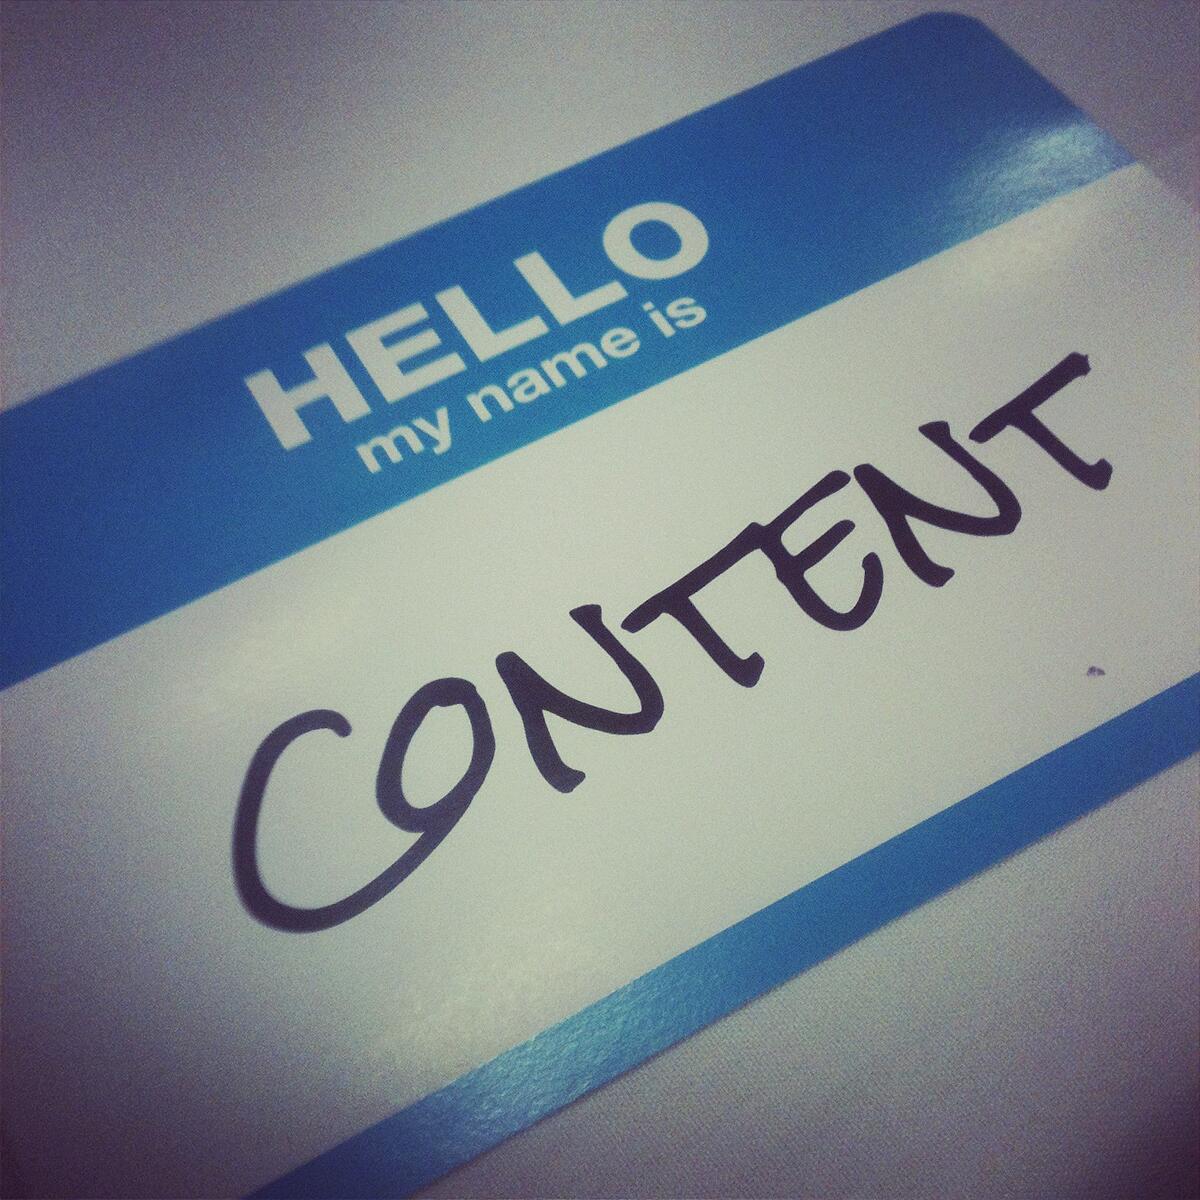 Funny Pic of the Week – How's Your Content Marketing?